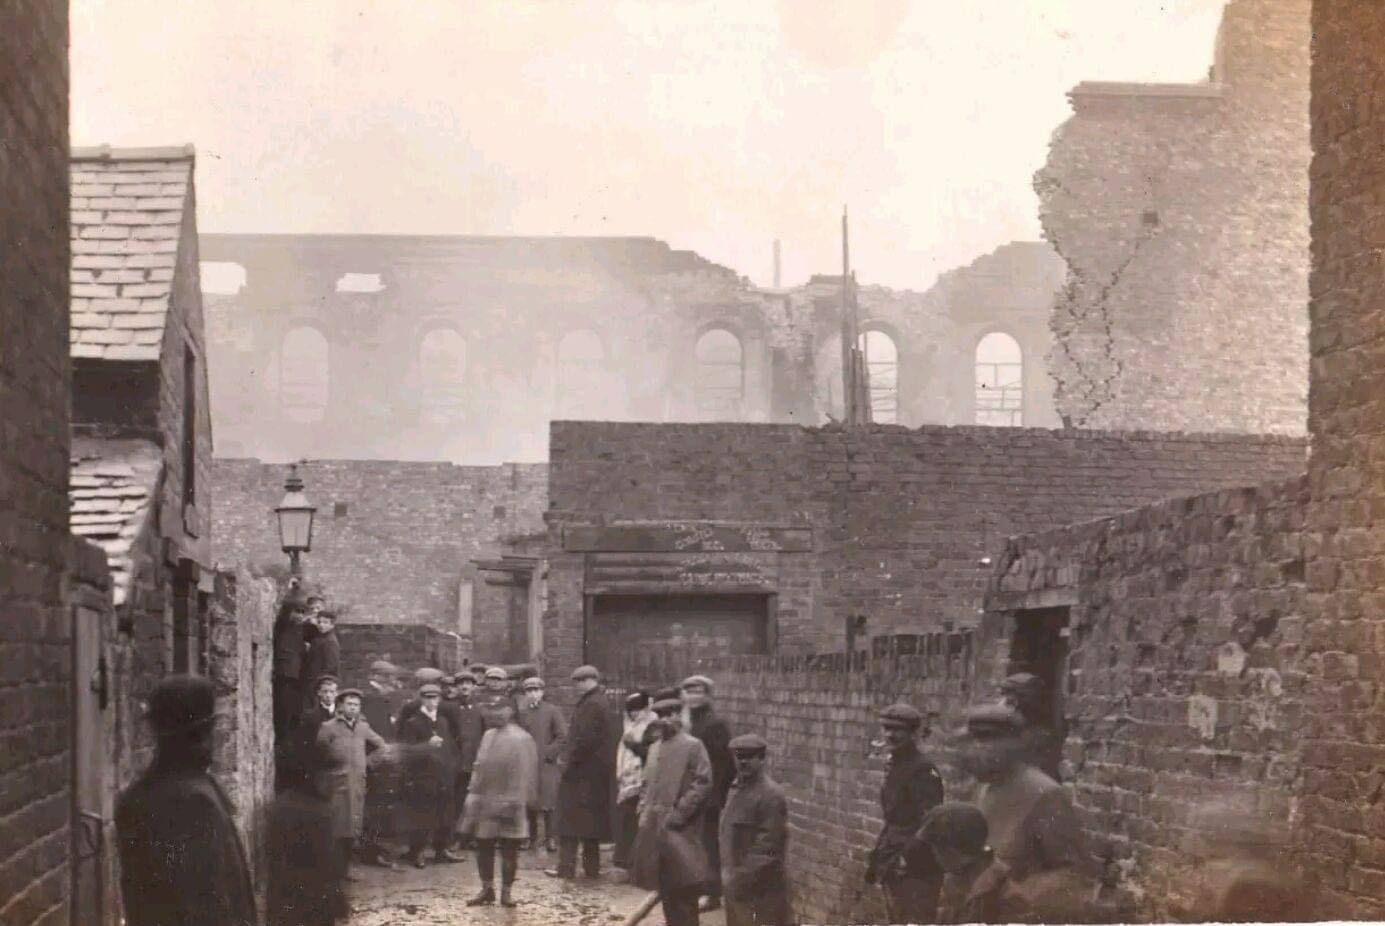  Damage caused by the 1907 fire as seen from the outside. Pictures from Stuart Jones